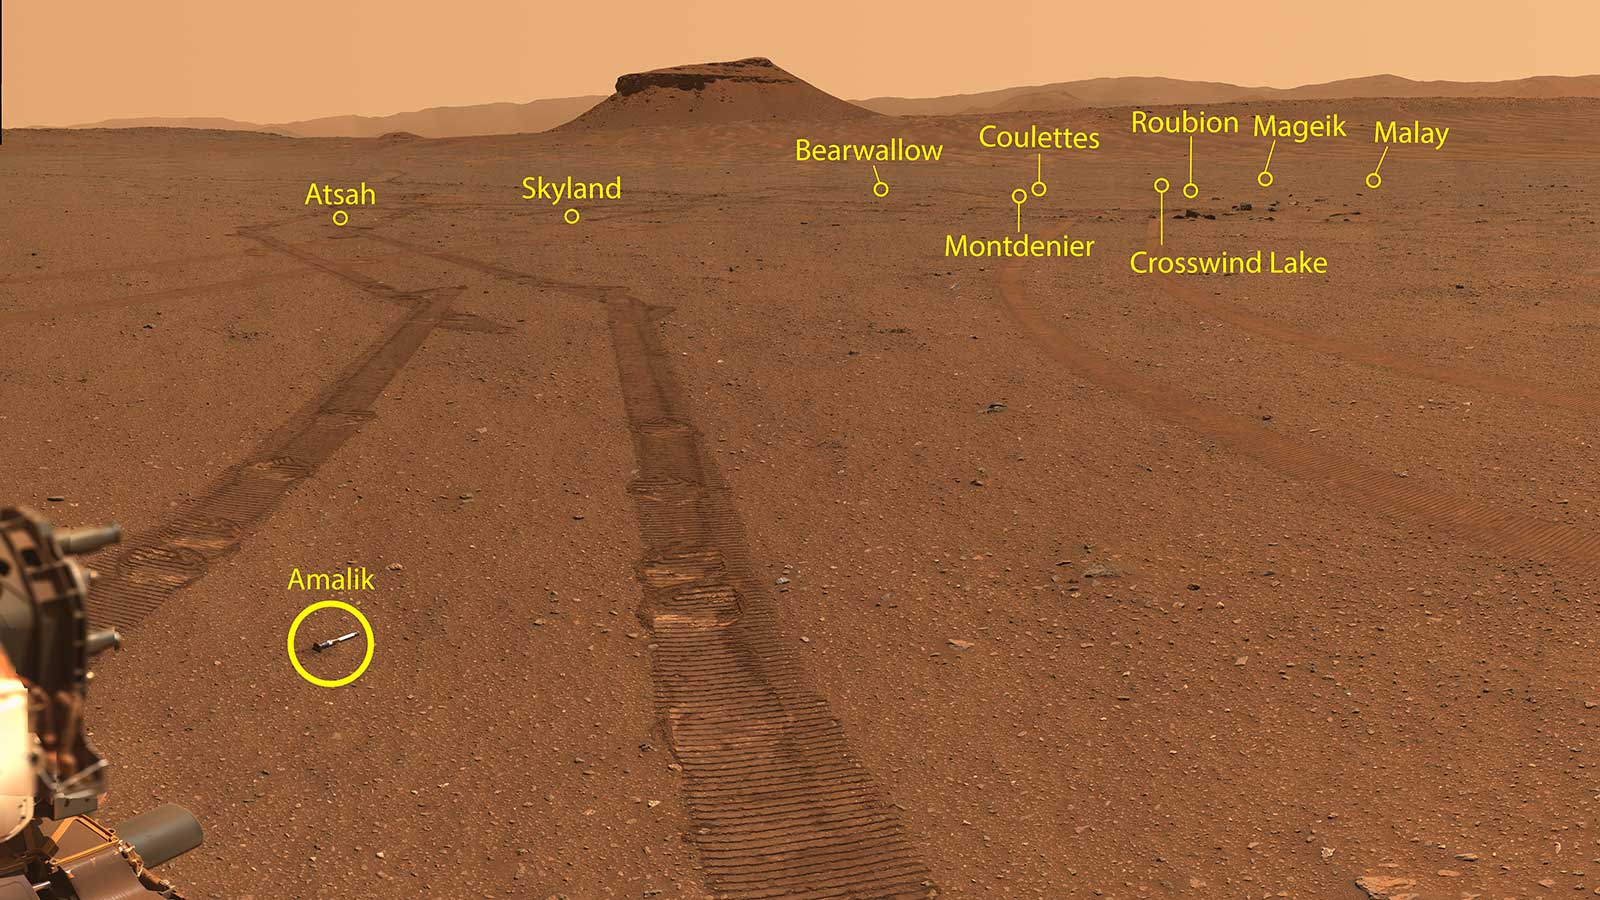 Ten small sample collection tubes lay along the tire tracks of the Perseverance rover. A mesa is on the horizon.